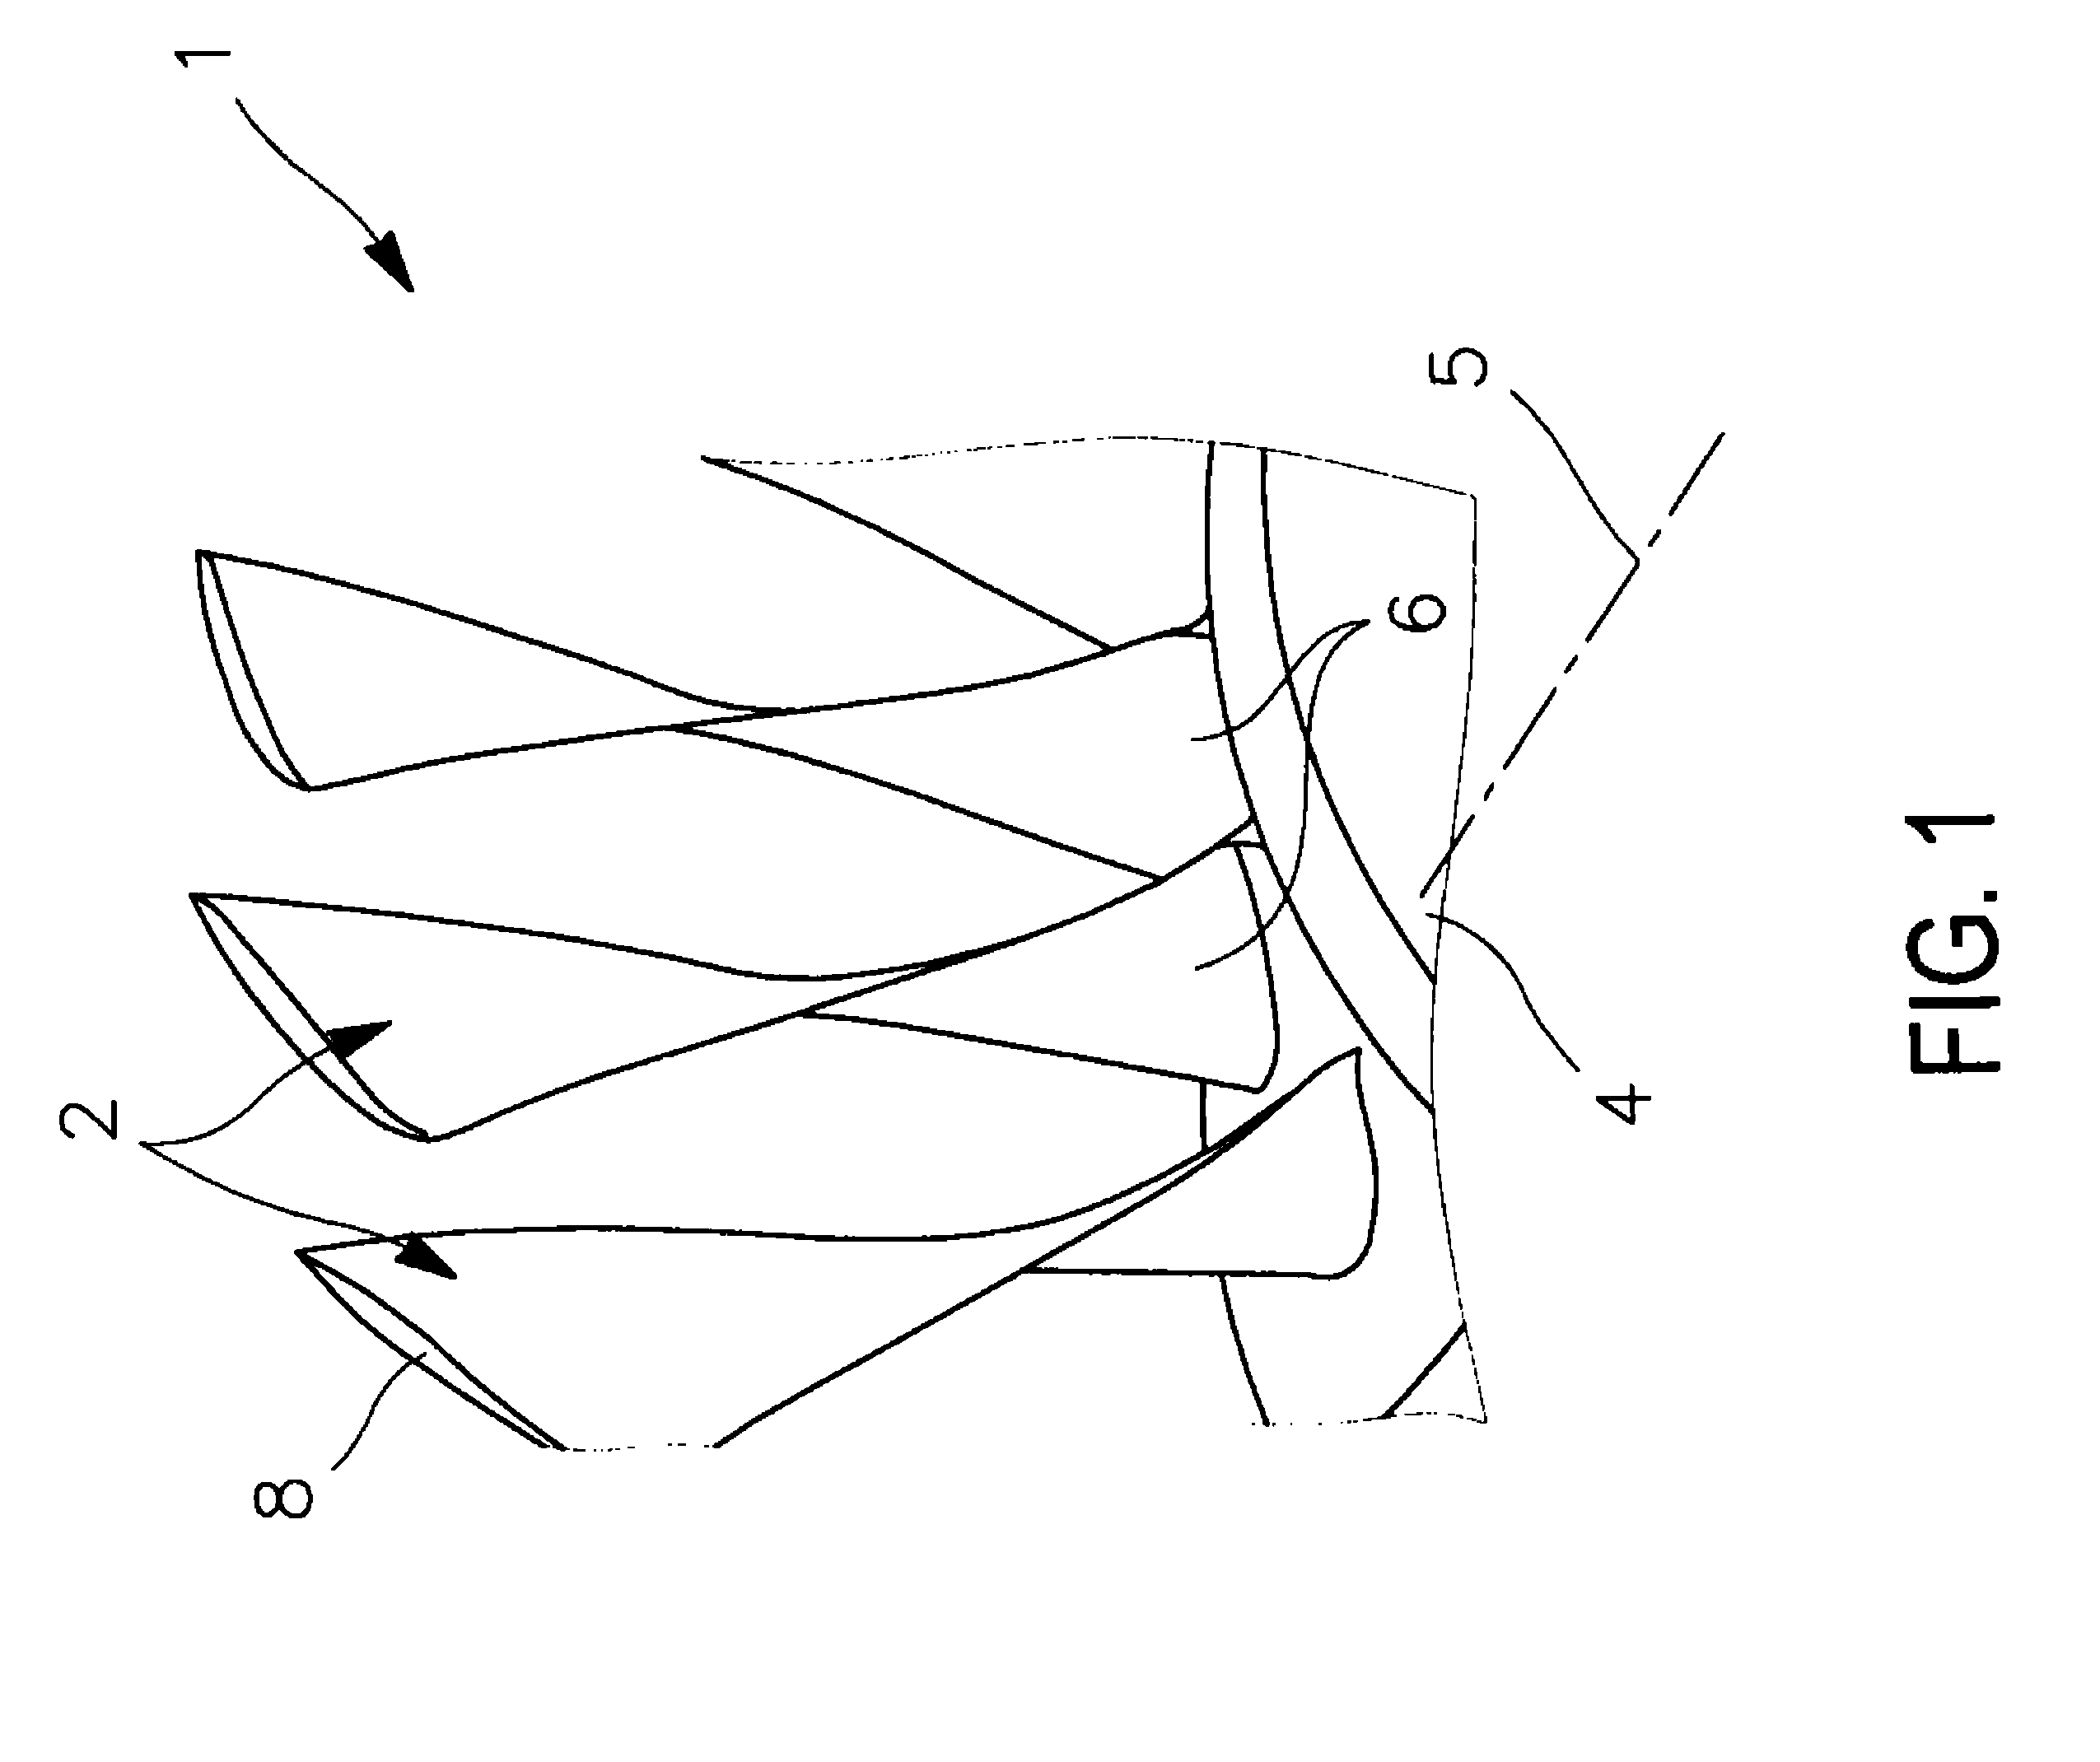 Process for manufacturing a single-piece blisk with a temporary blade support ring removed after a milling finishing step